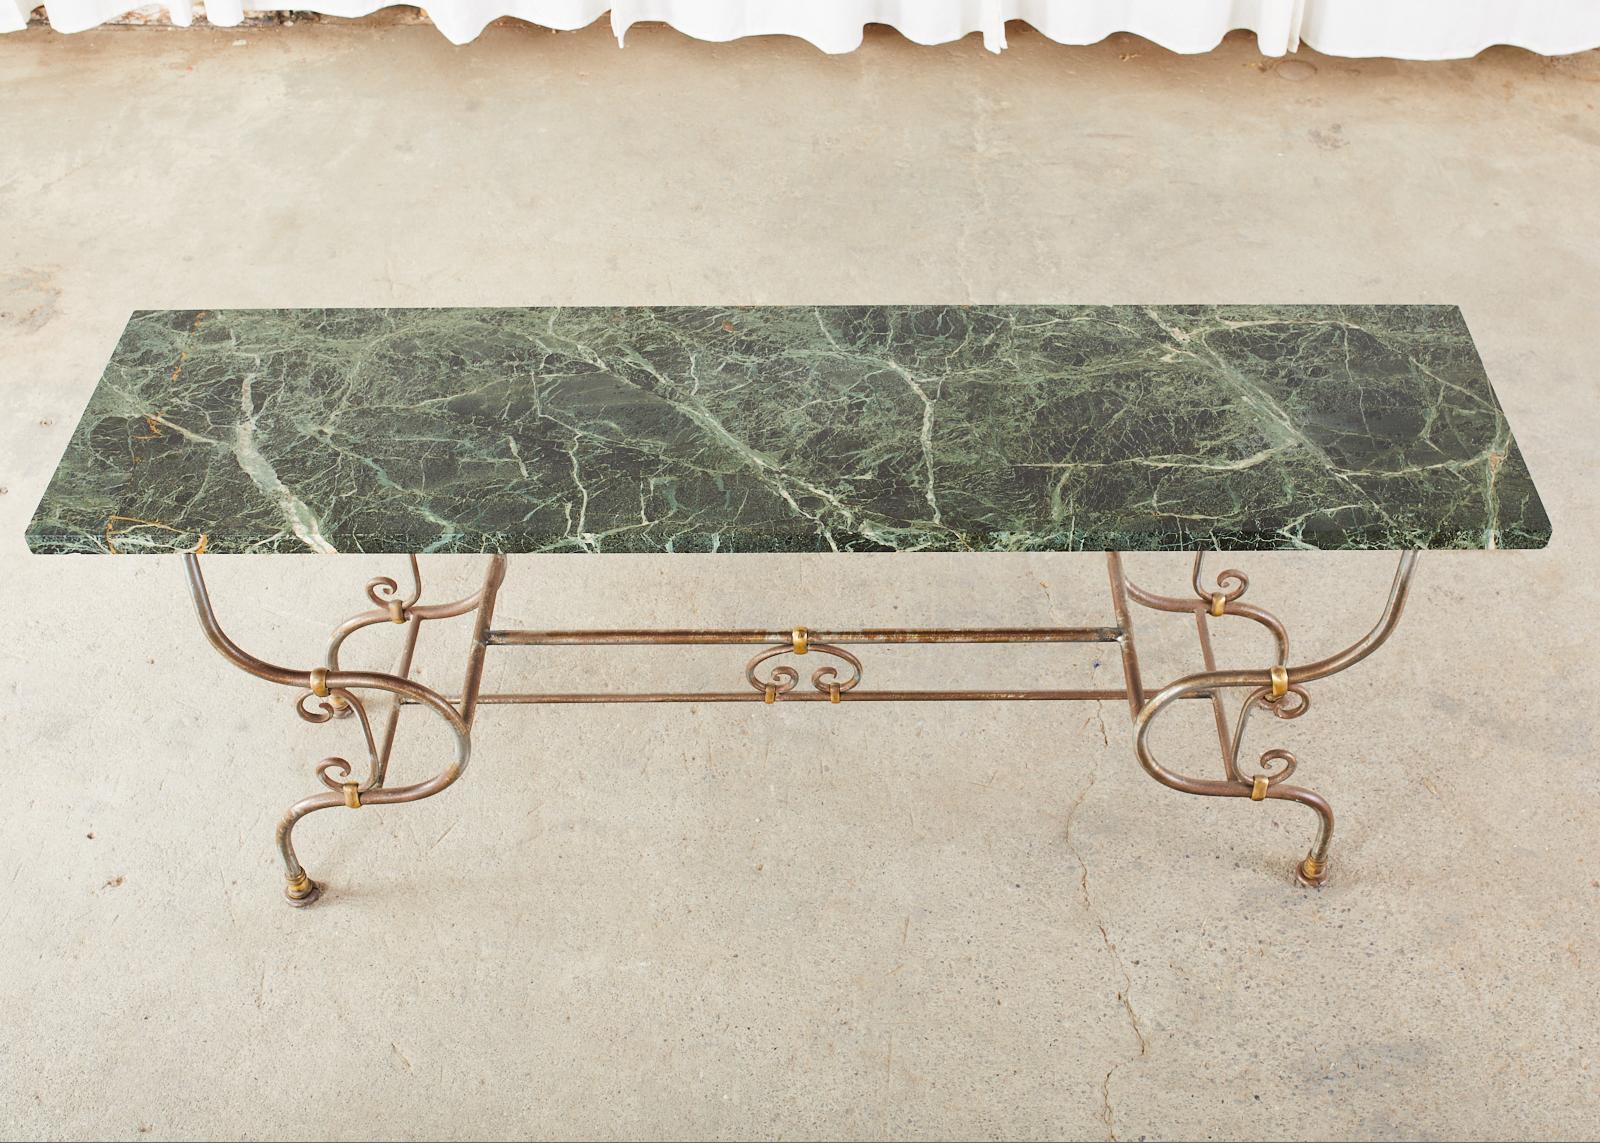 Fantastic French Art Nouveau pastry table or console table featuring a dark green marble slab top. The thick marble is supported by a bronze mounted steel decorative arts base with whimsical scroll work and a beautiful profile. The base measures 66